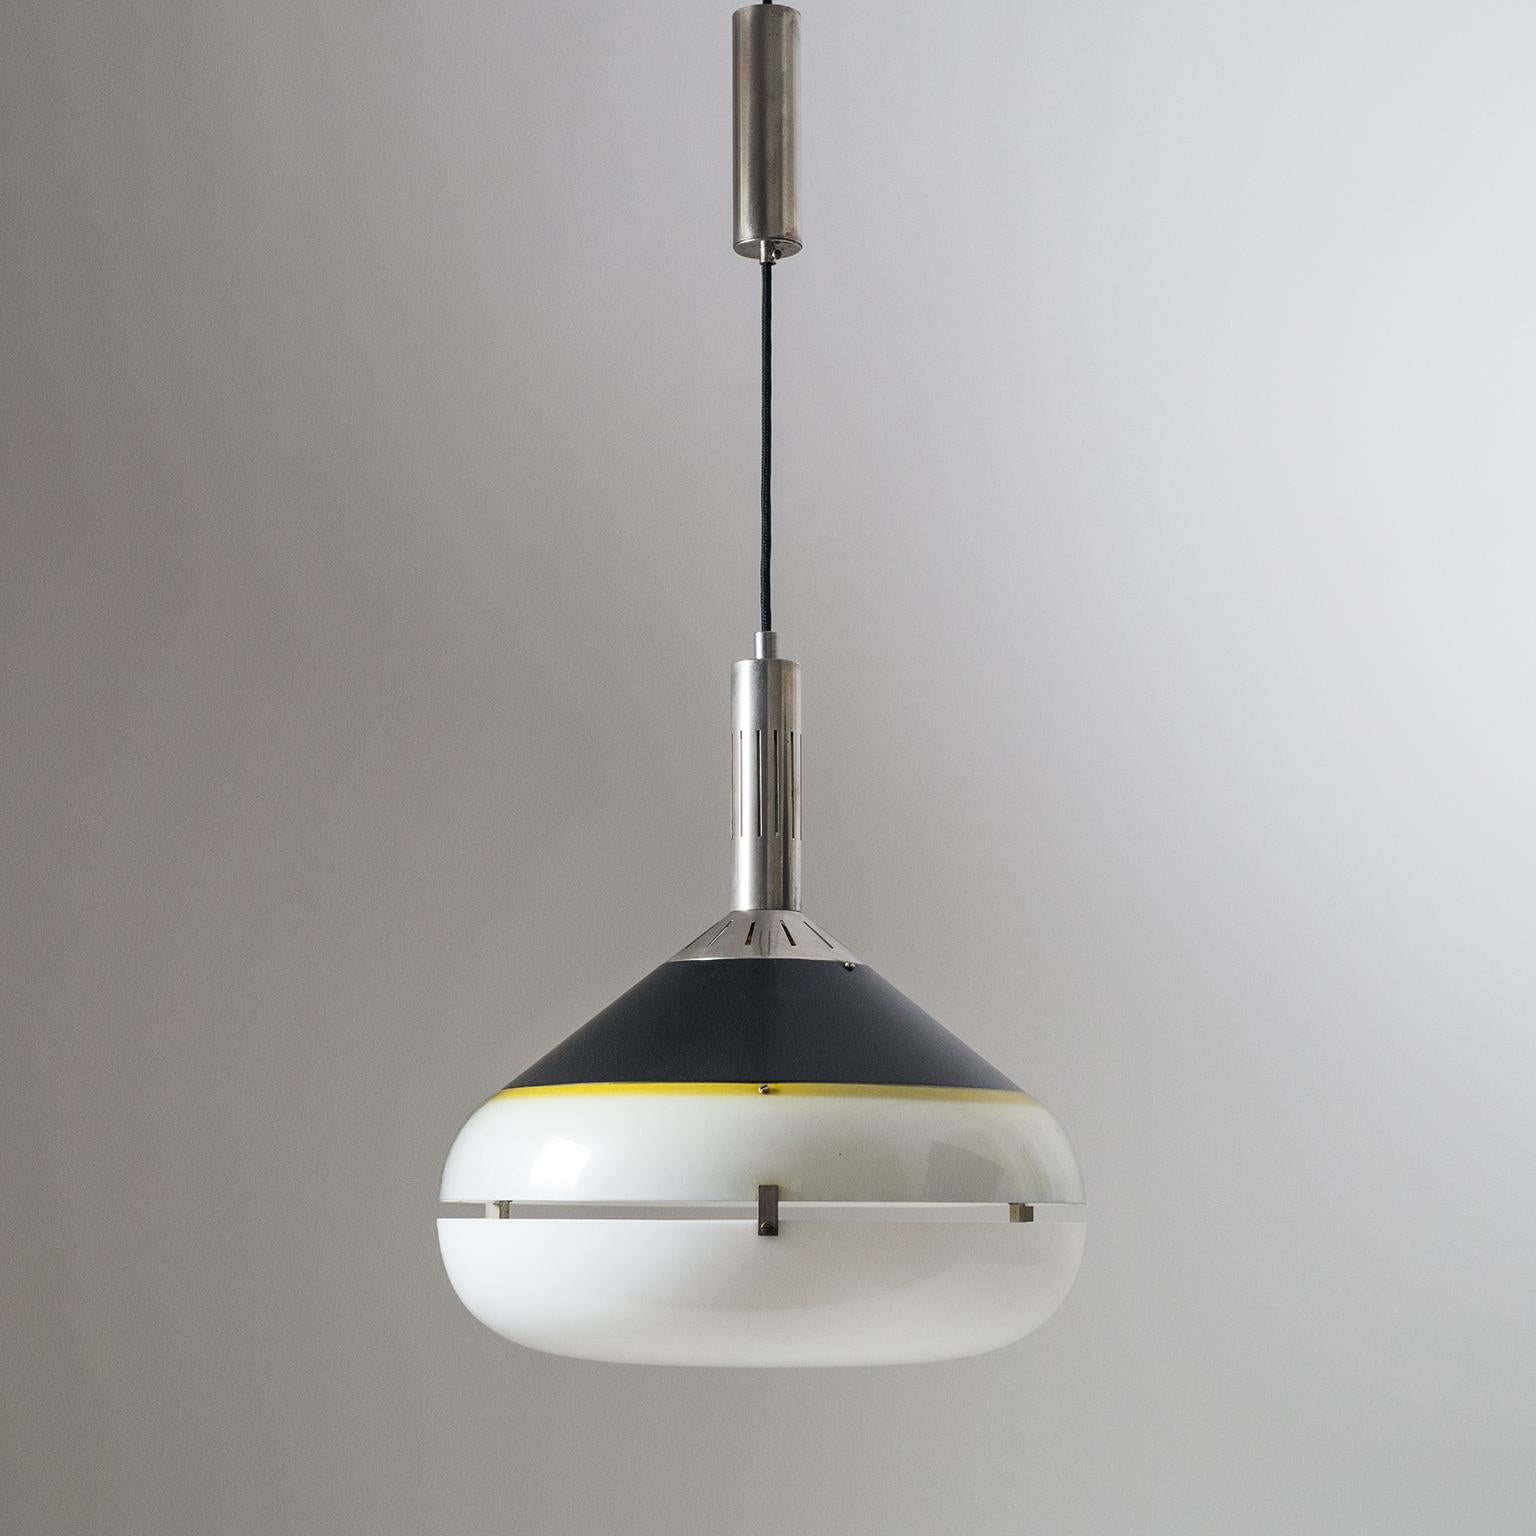 Italian pendant attributed to Stilux from the 1950-1960s. Slim nickeled brass hardware with a black lacquered shade and dual acrylic diffusers. Fine original condition with a light patina on the nickel and light scratches on the rims of the acrylic